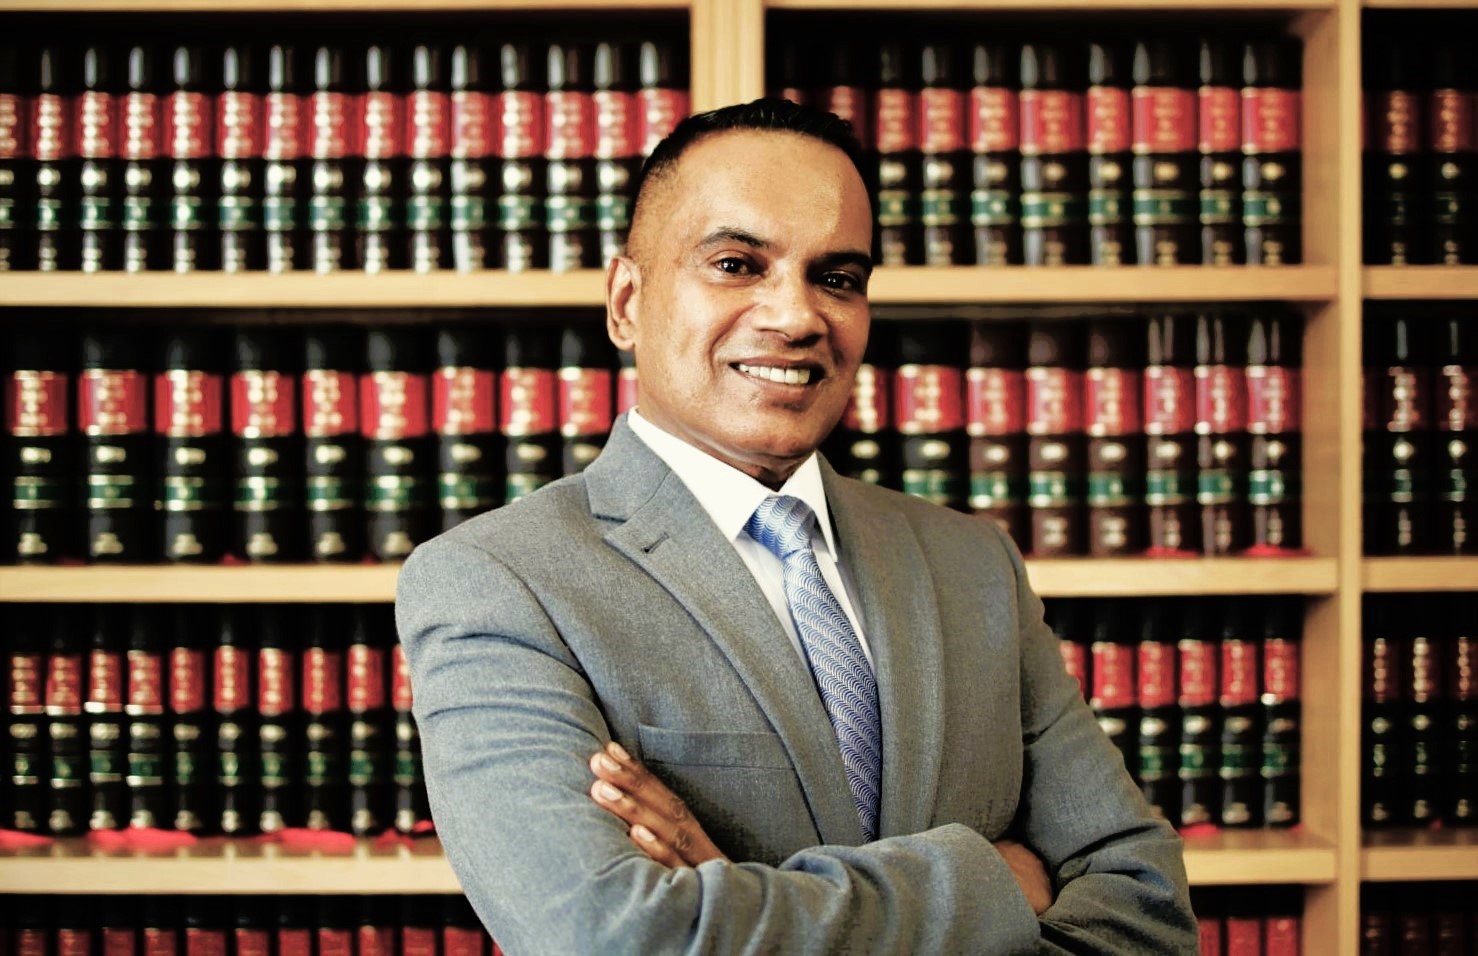 Advocate of the High Court of South Africa